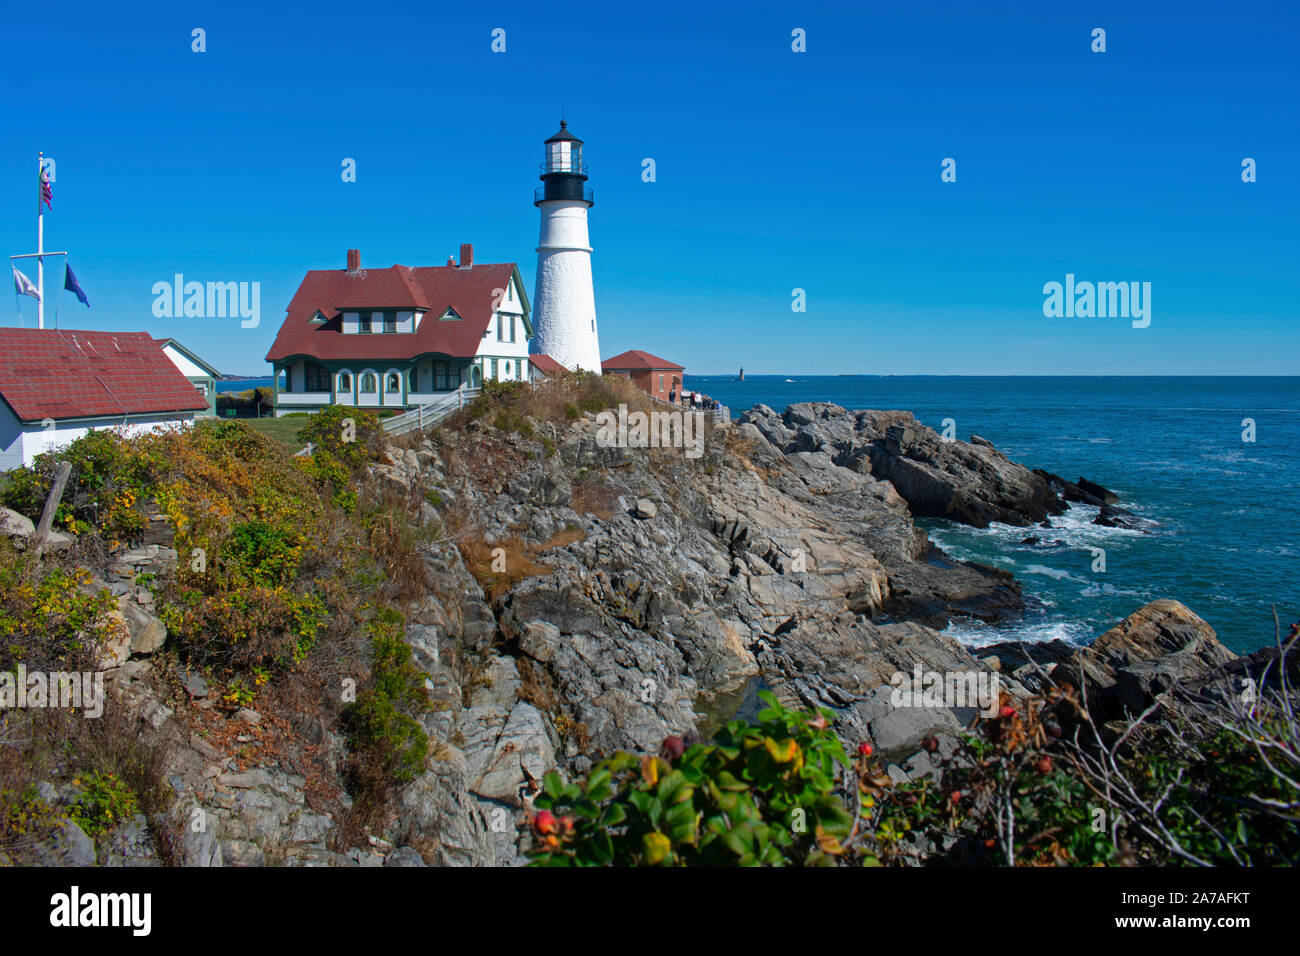 Red roofed Portland Head Lighthouse with a white light tower viewed from a rocky ledge in Fort Williams Park in Cape Elizabeth, Maine -02 Stock Photo